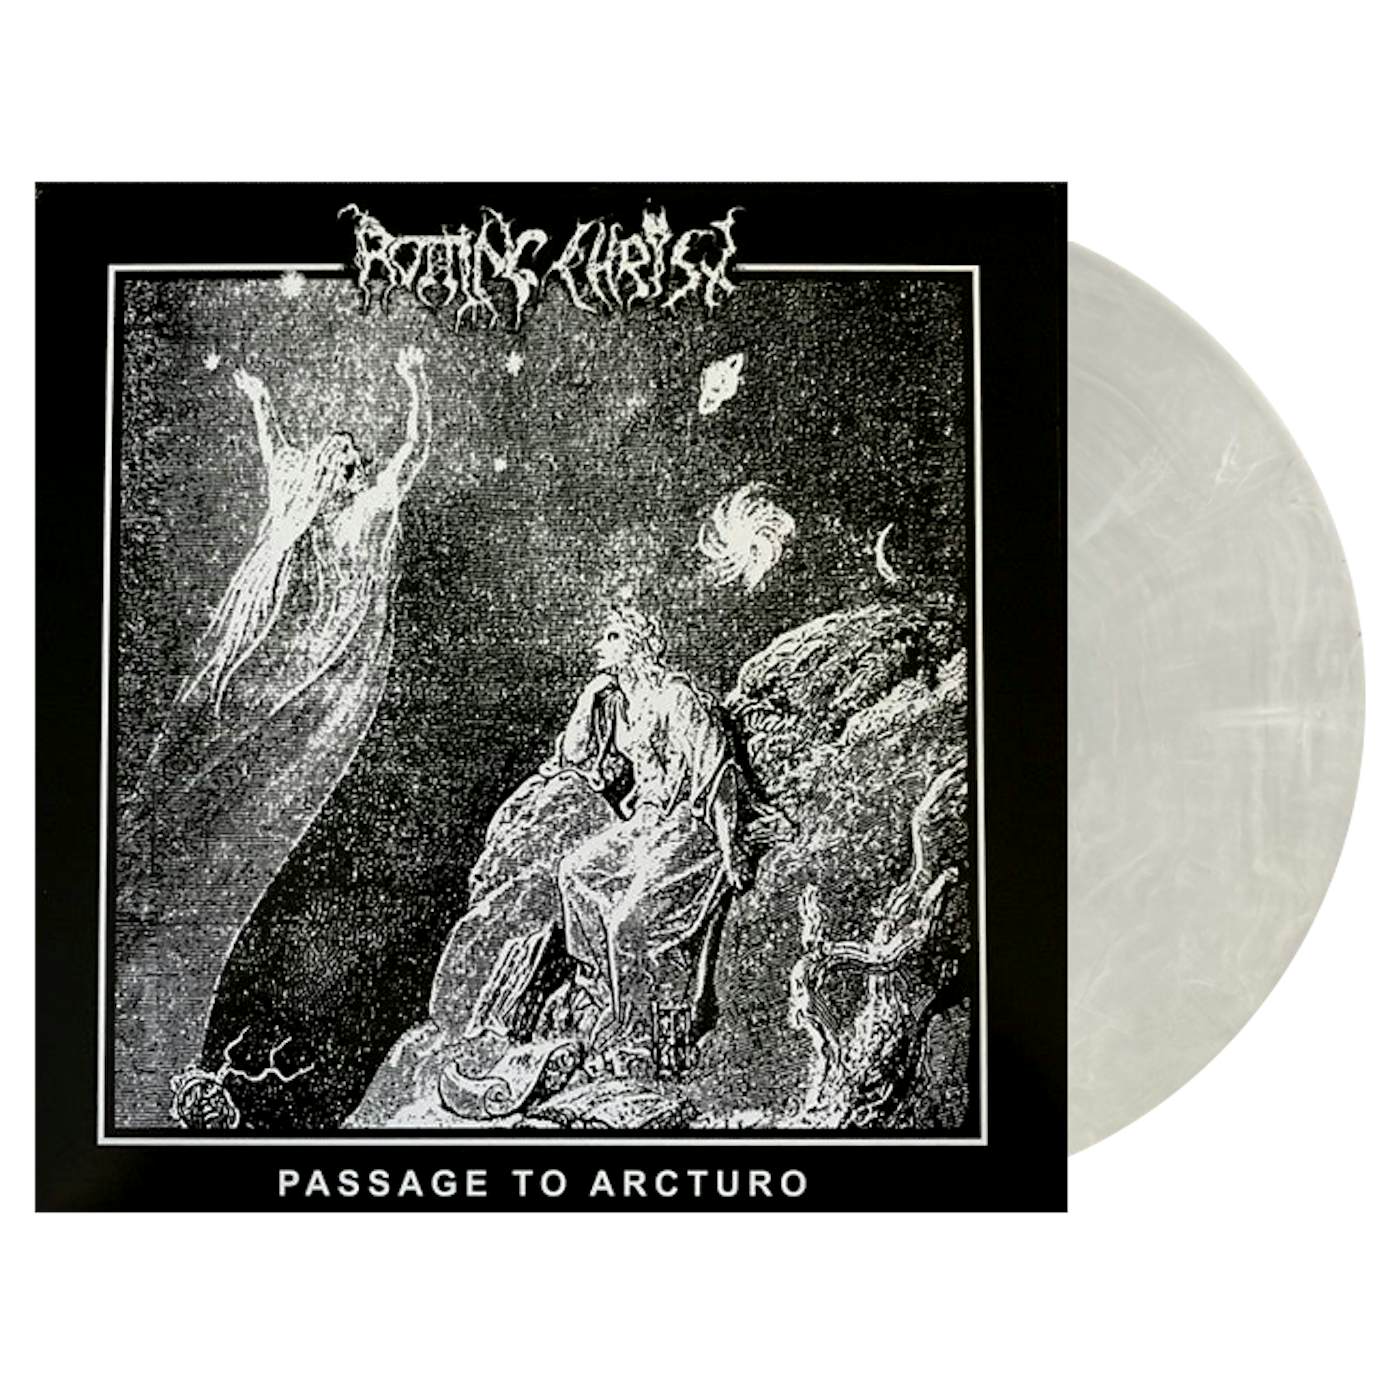  ROTTING CHRIST - 'Passage To Arcturo' LP (Clear/White) (Vinyl)